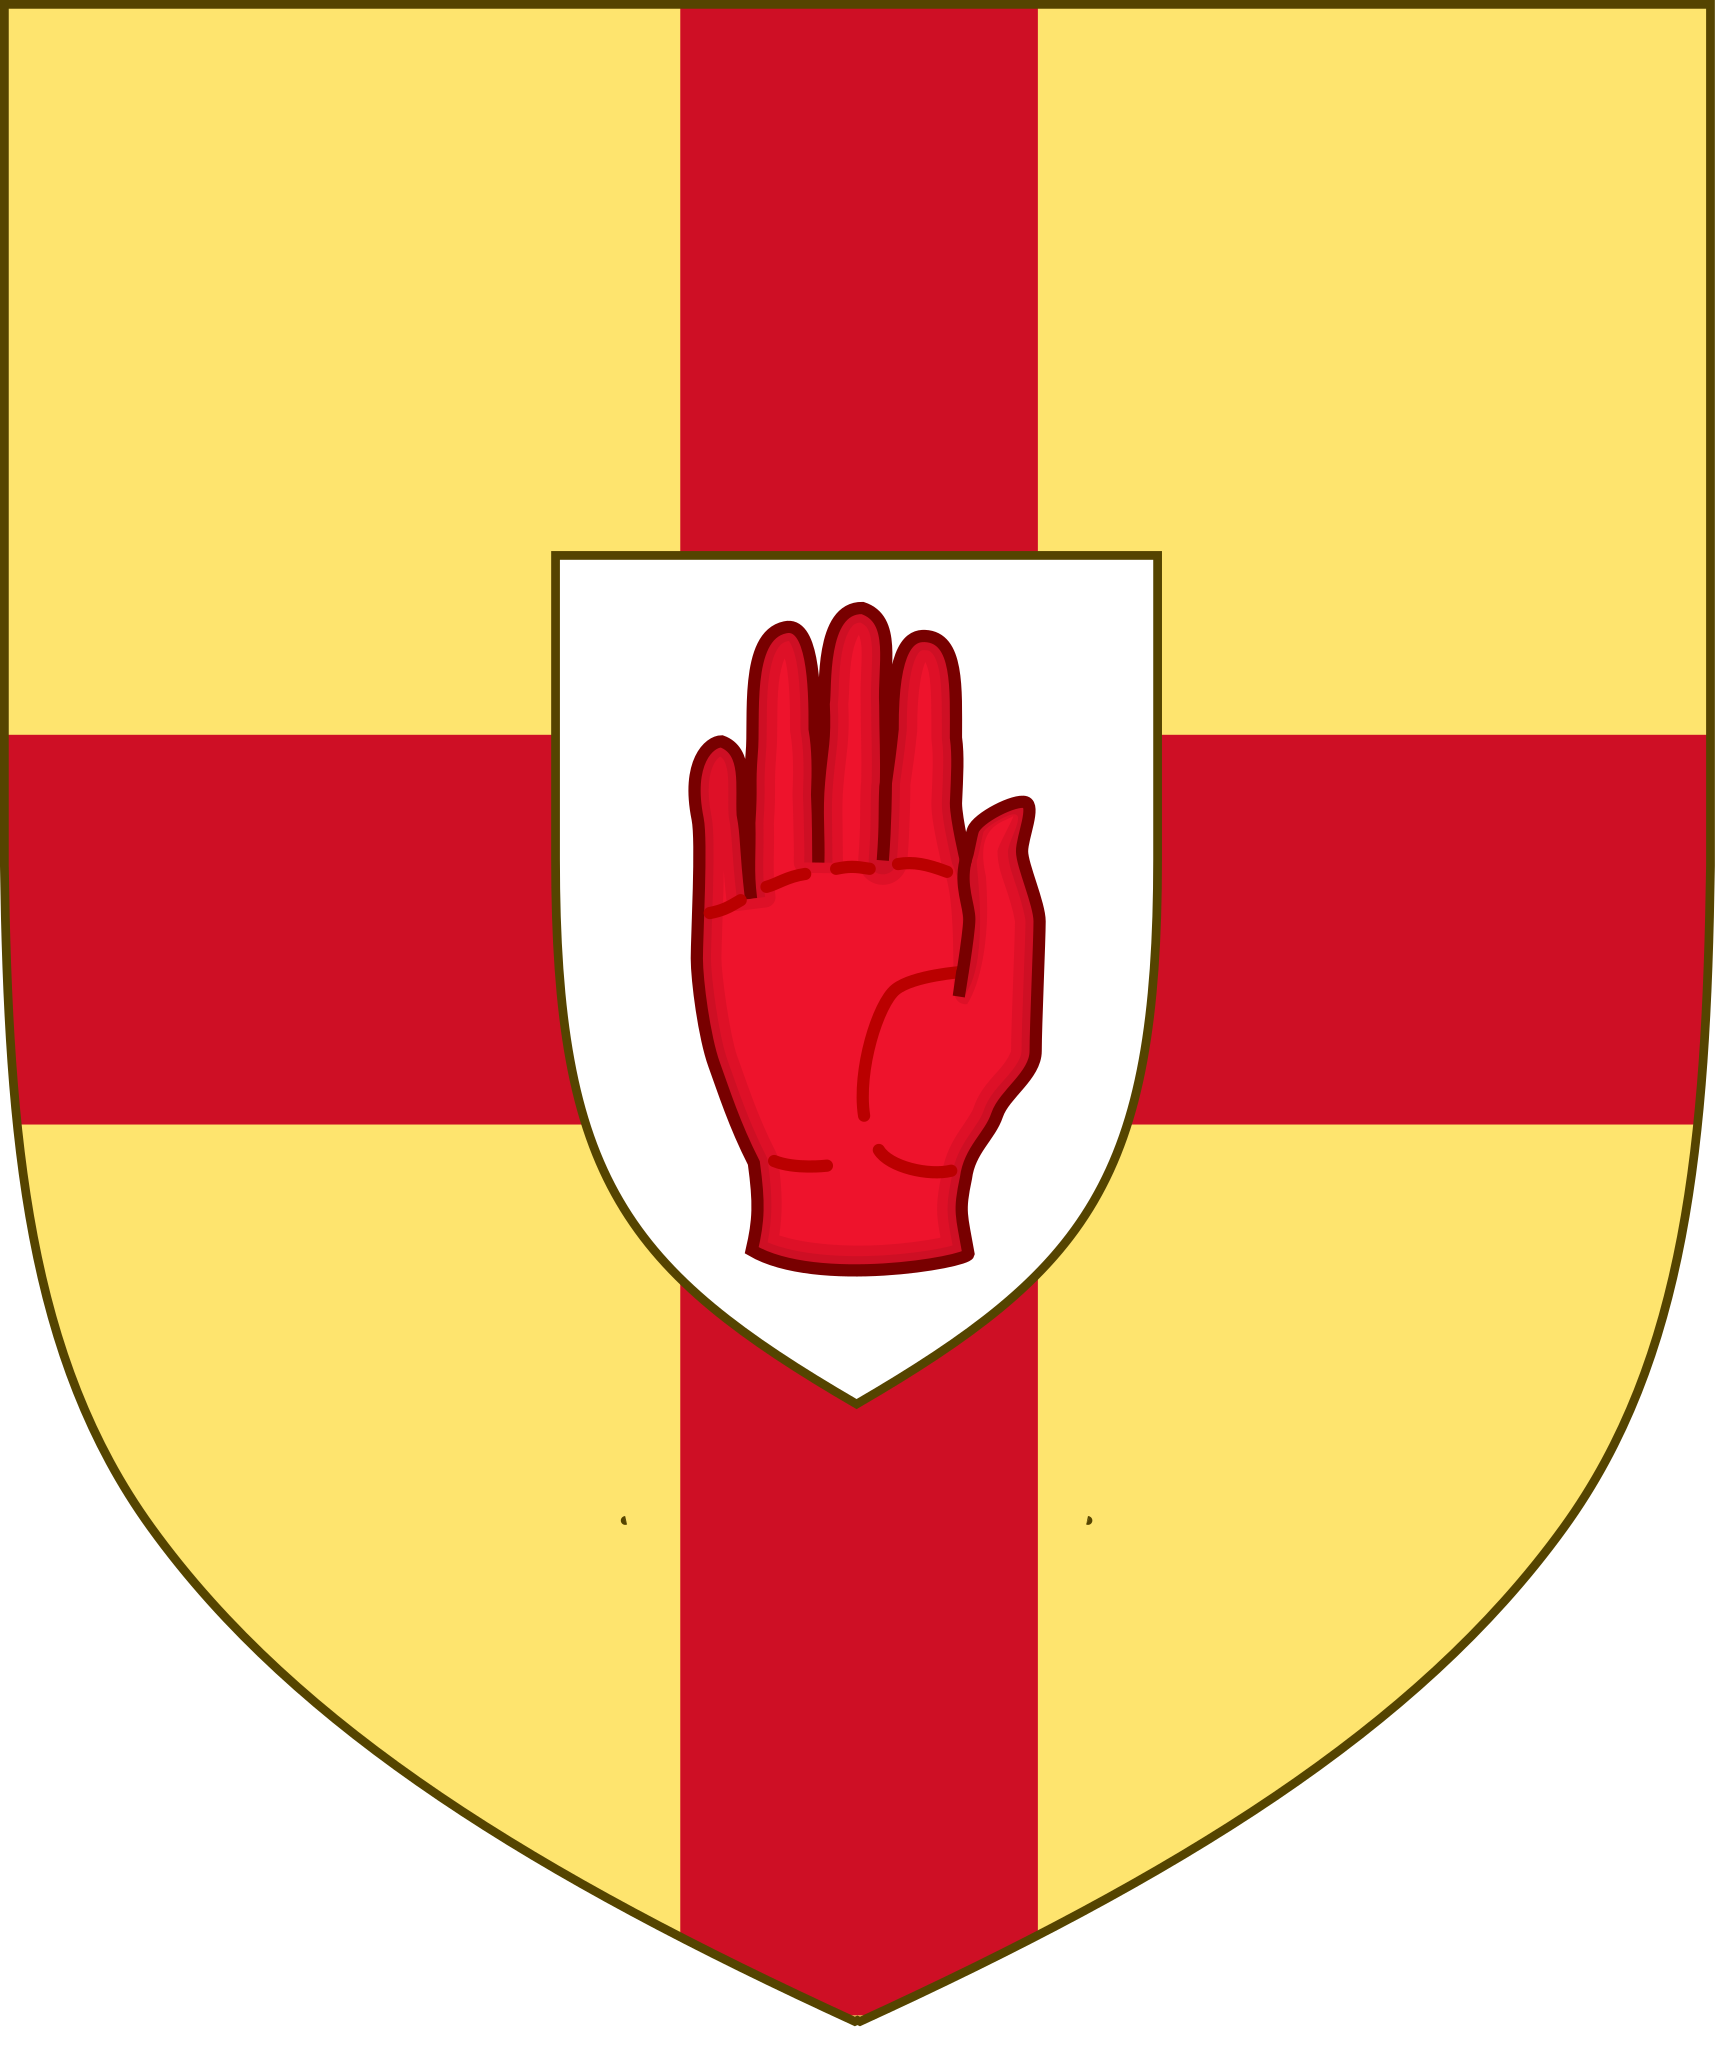 File:Coat of arms of Ulster.svg - Wikimedia Commons